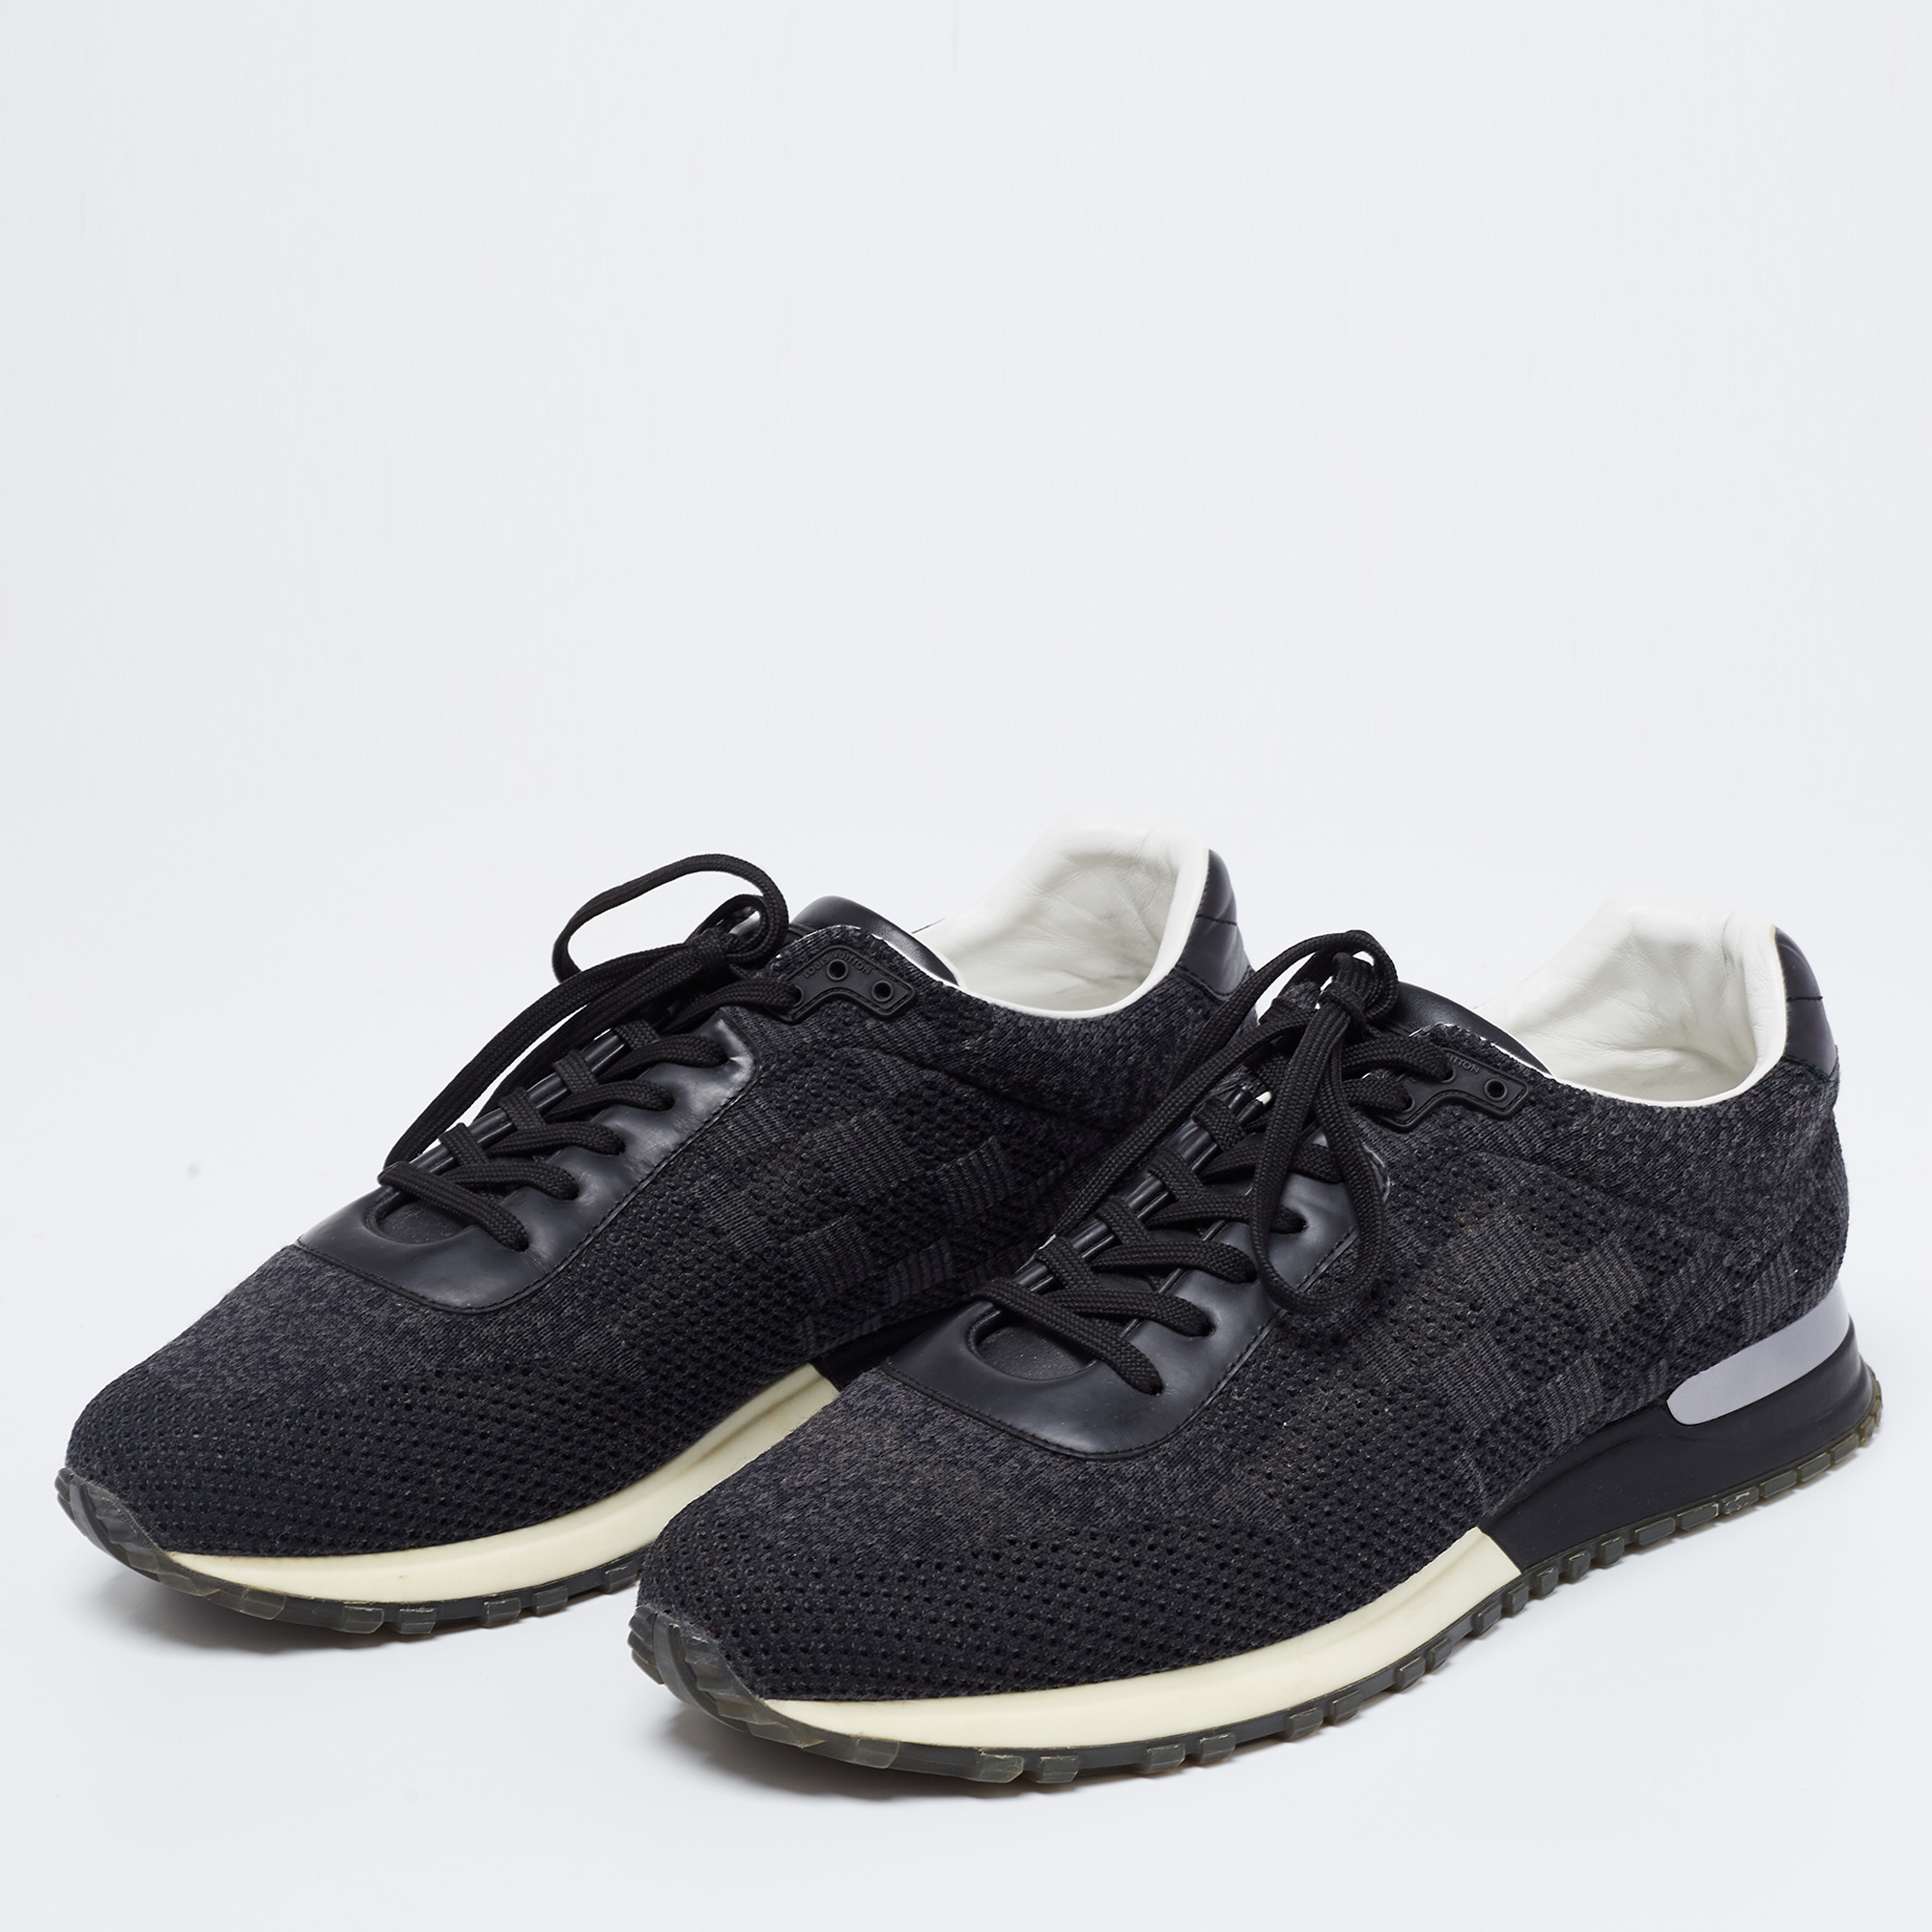 

Louis Vuitton Black Damier Knit Fabric And Leather Run Away Low Top Sneakers Size